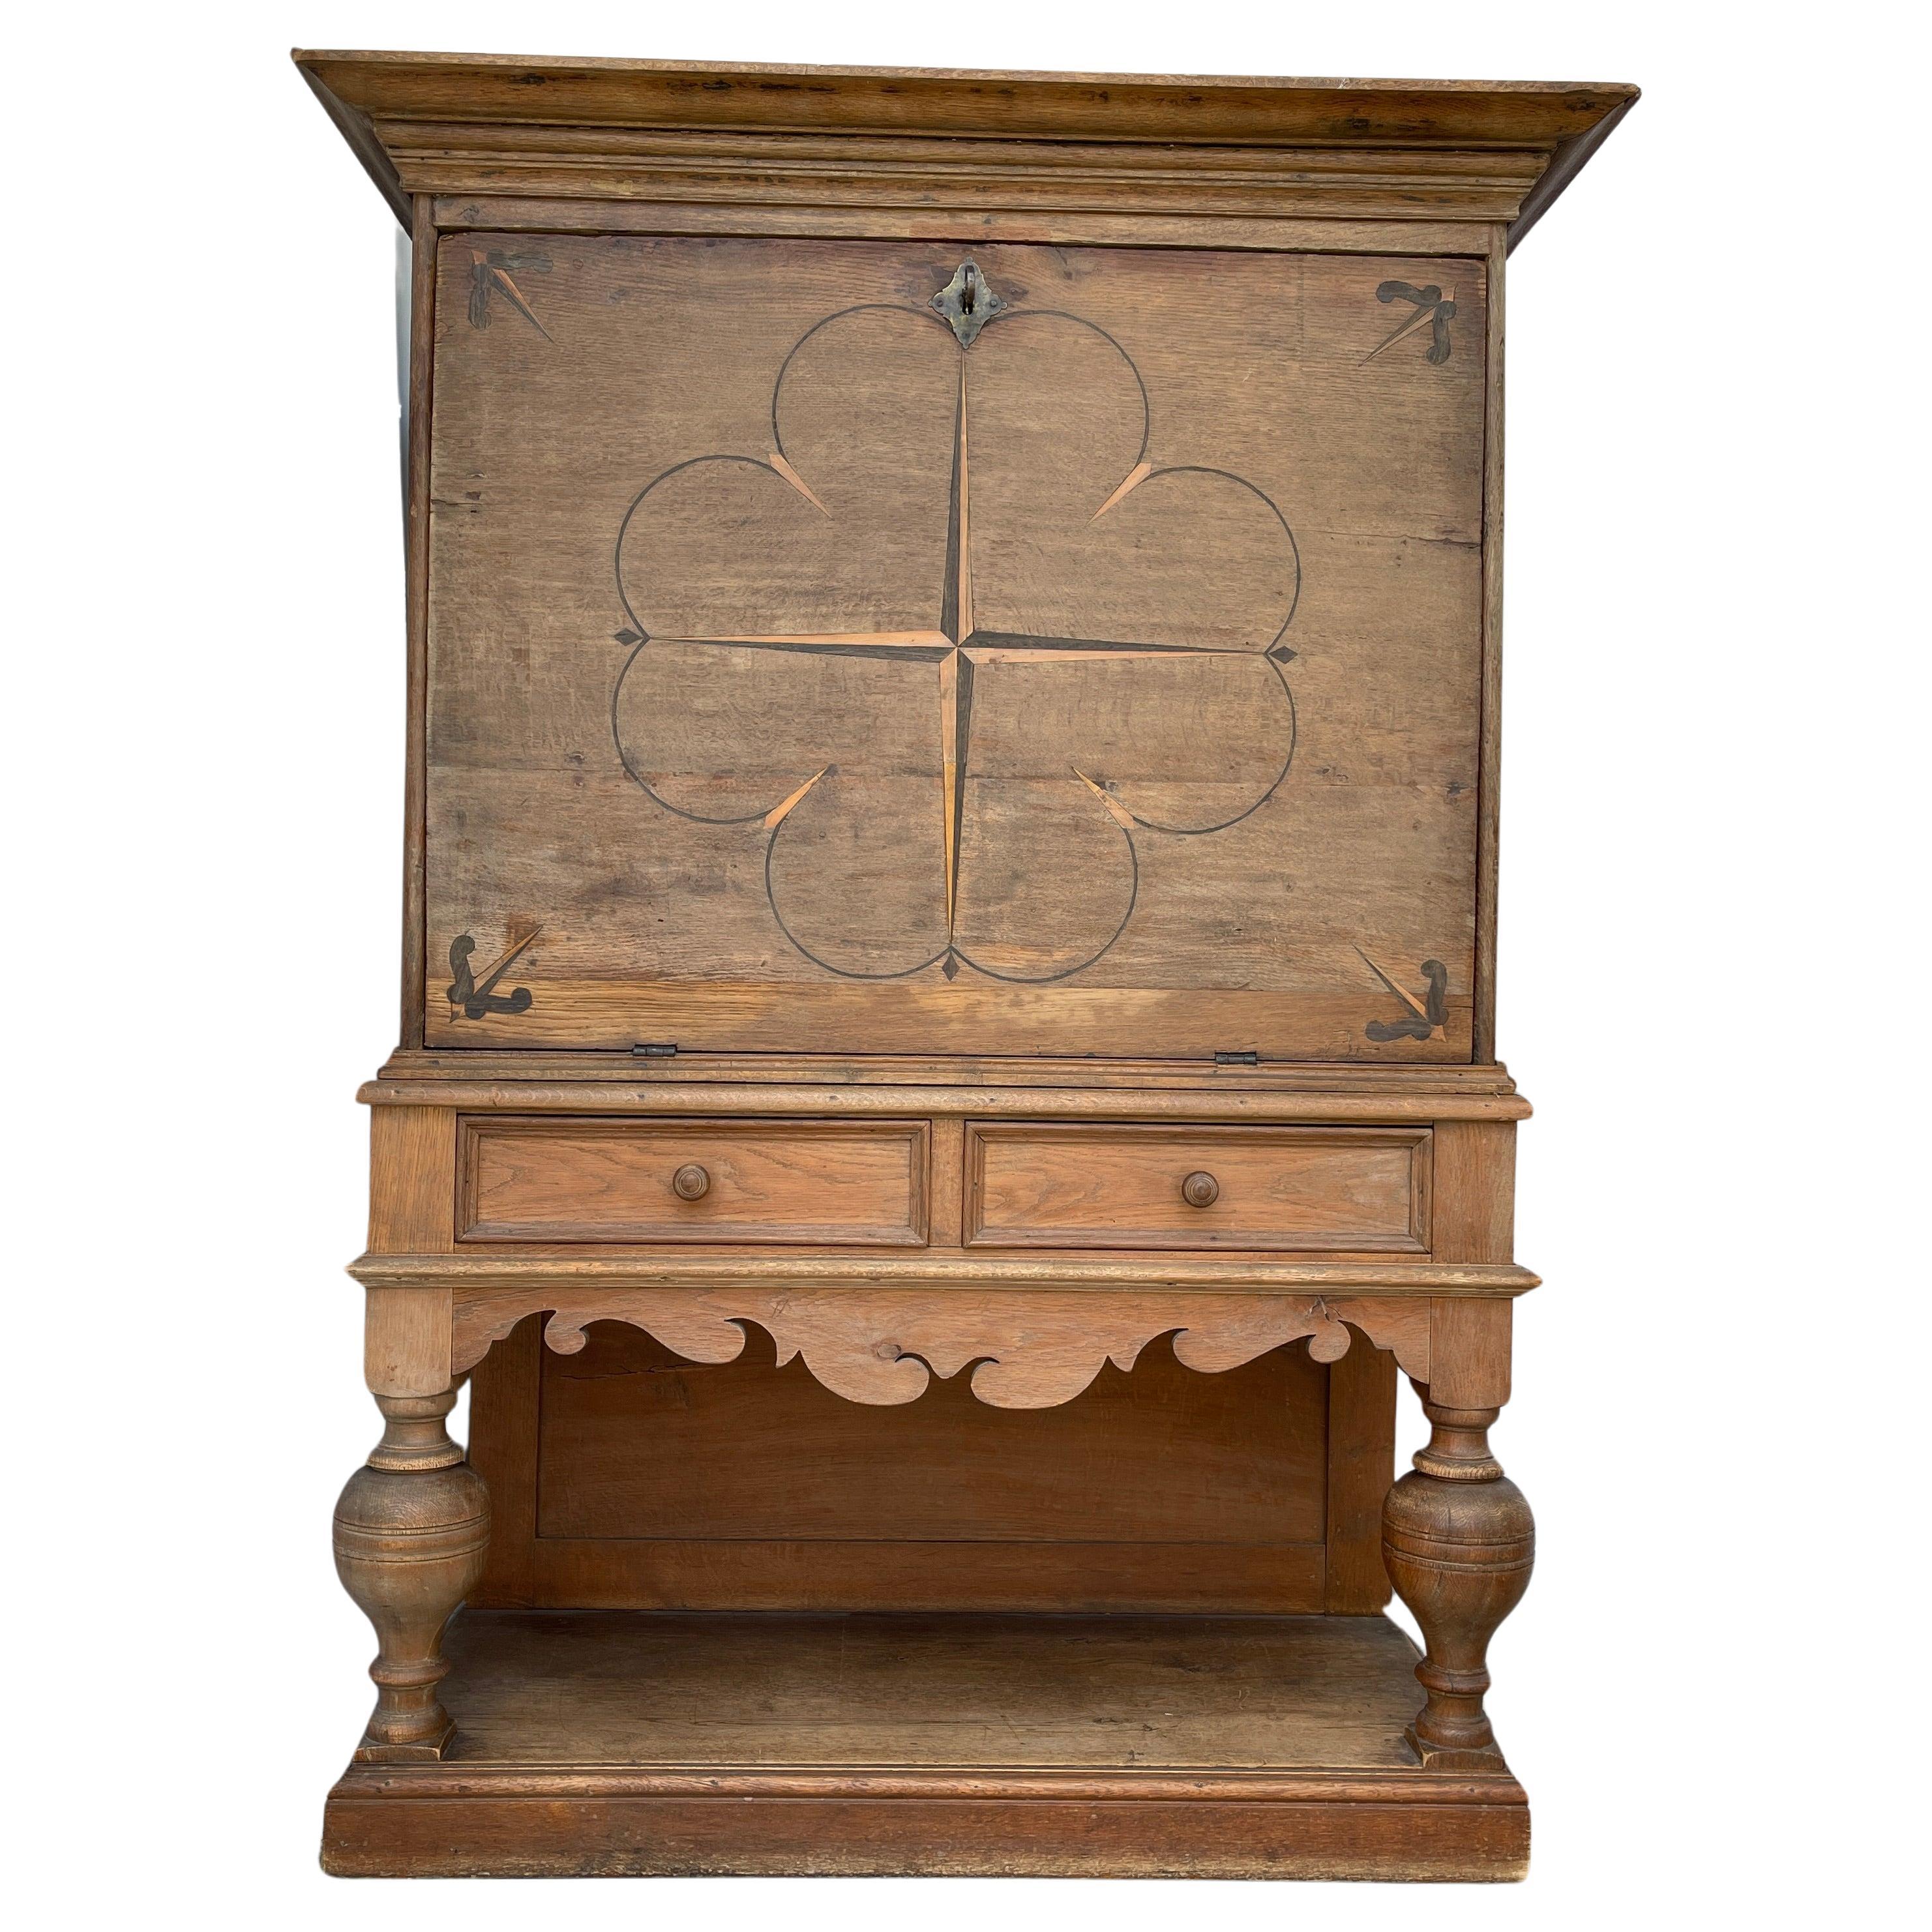 Danish Baroque Writing Cabinet With Nautical Compass Decor, Circa 1740's   For Sale